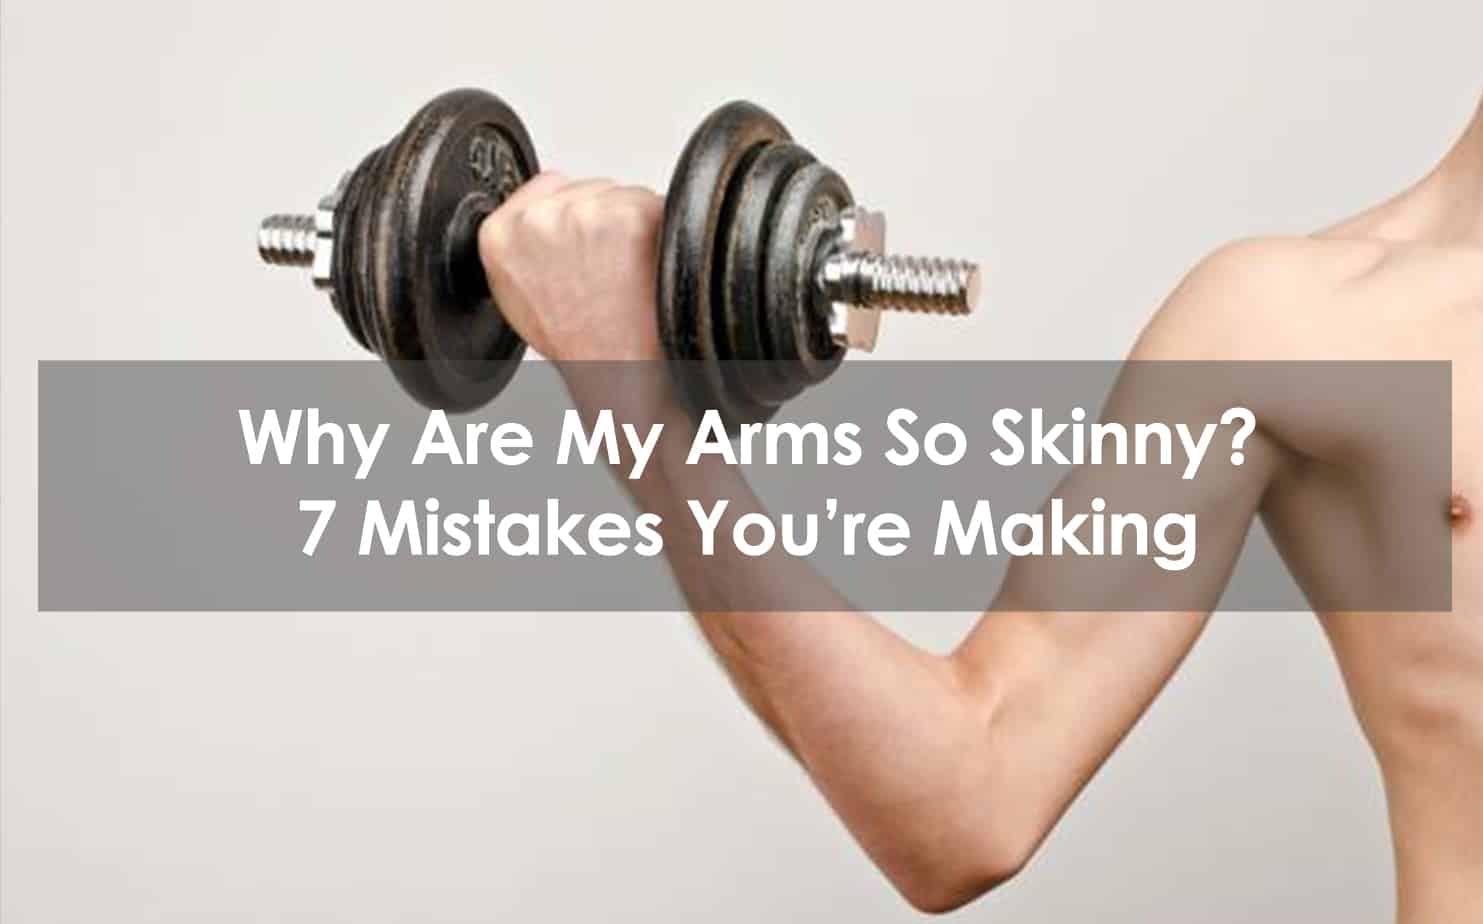 Why Are My Arms So Skinny? 7 Mistakes You're Making